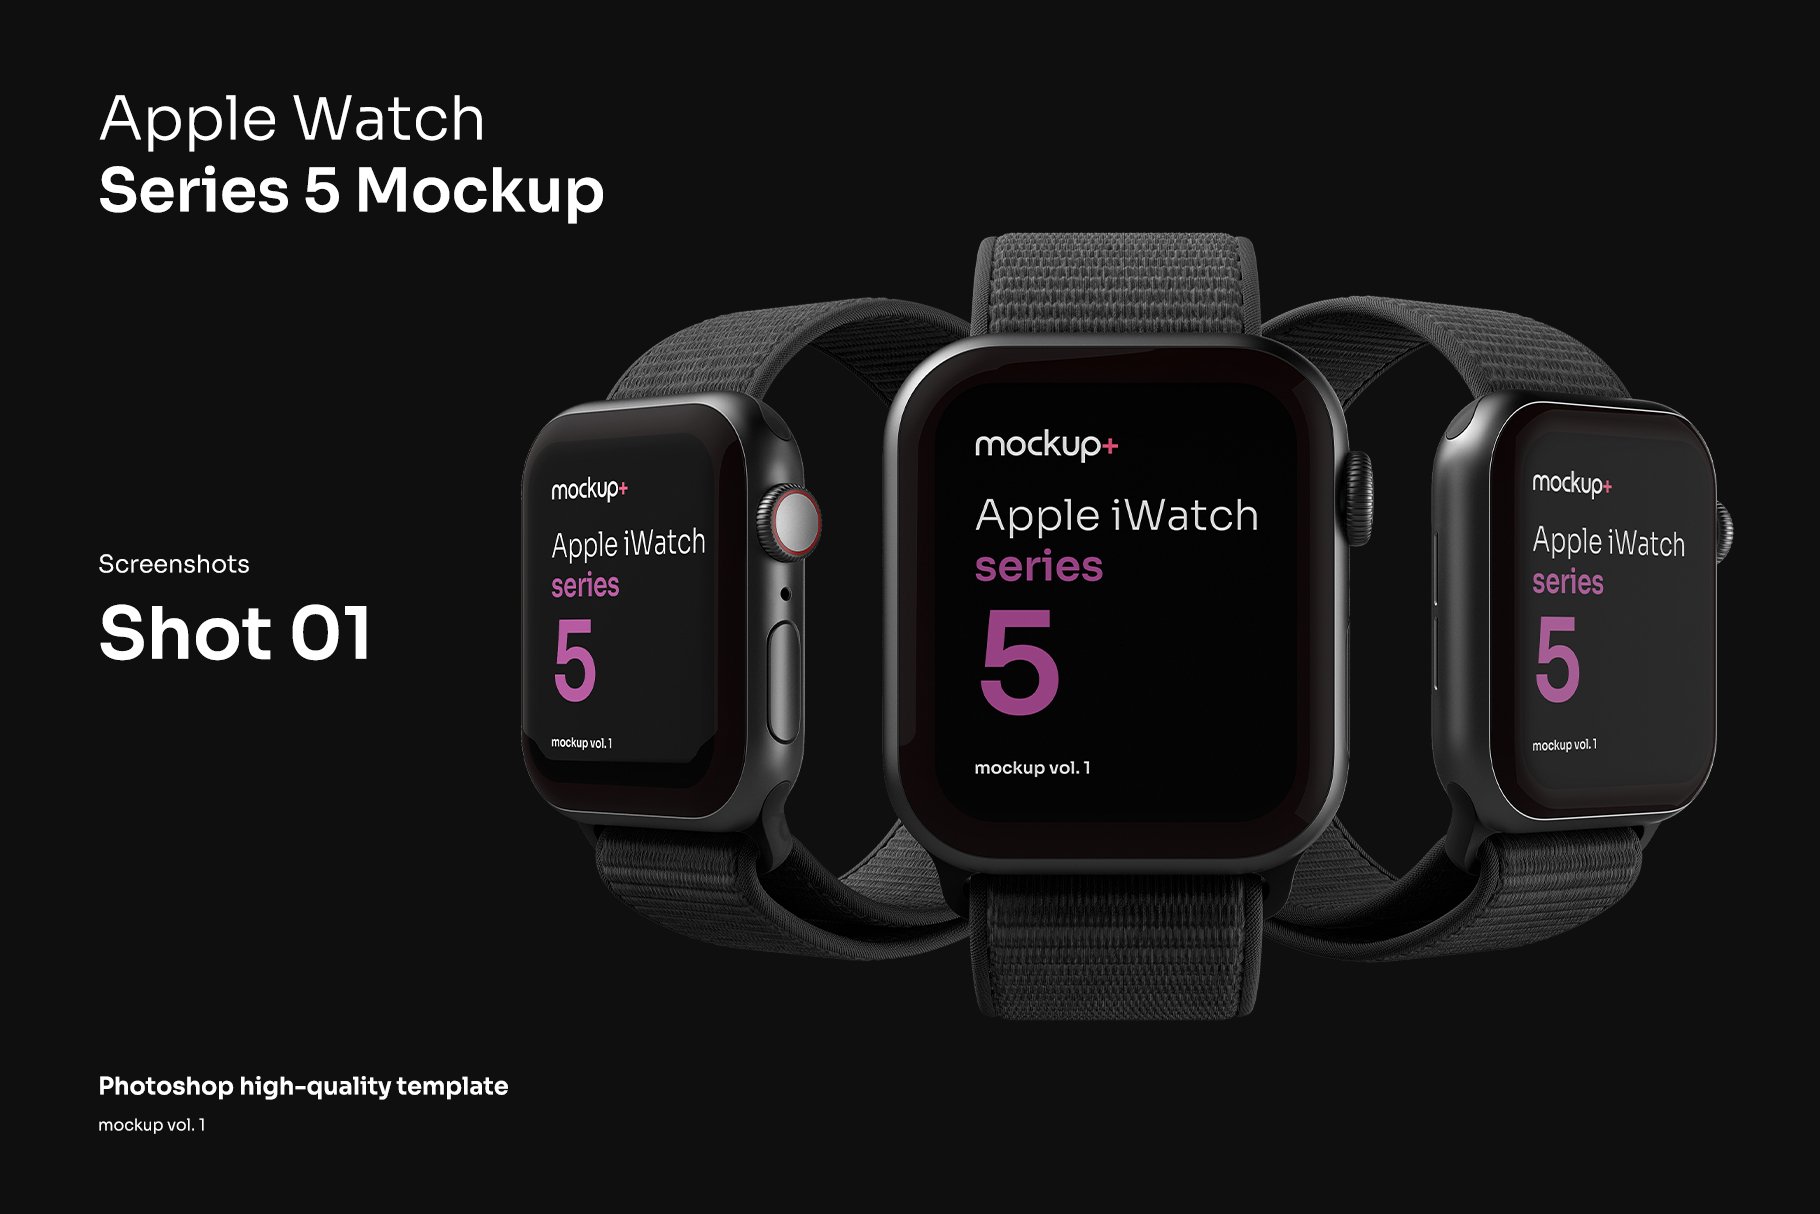 Apple Watch Series 5 Mockup preview image.